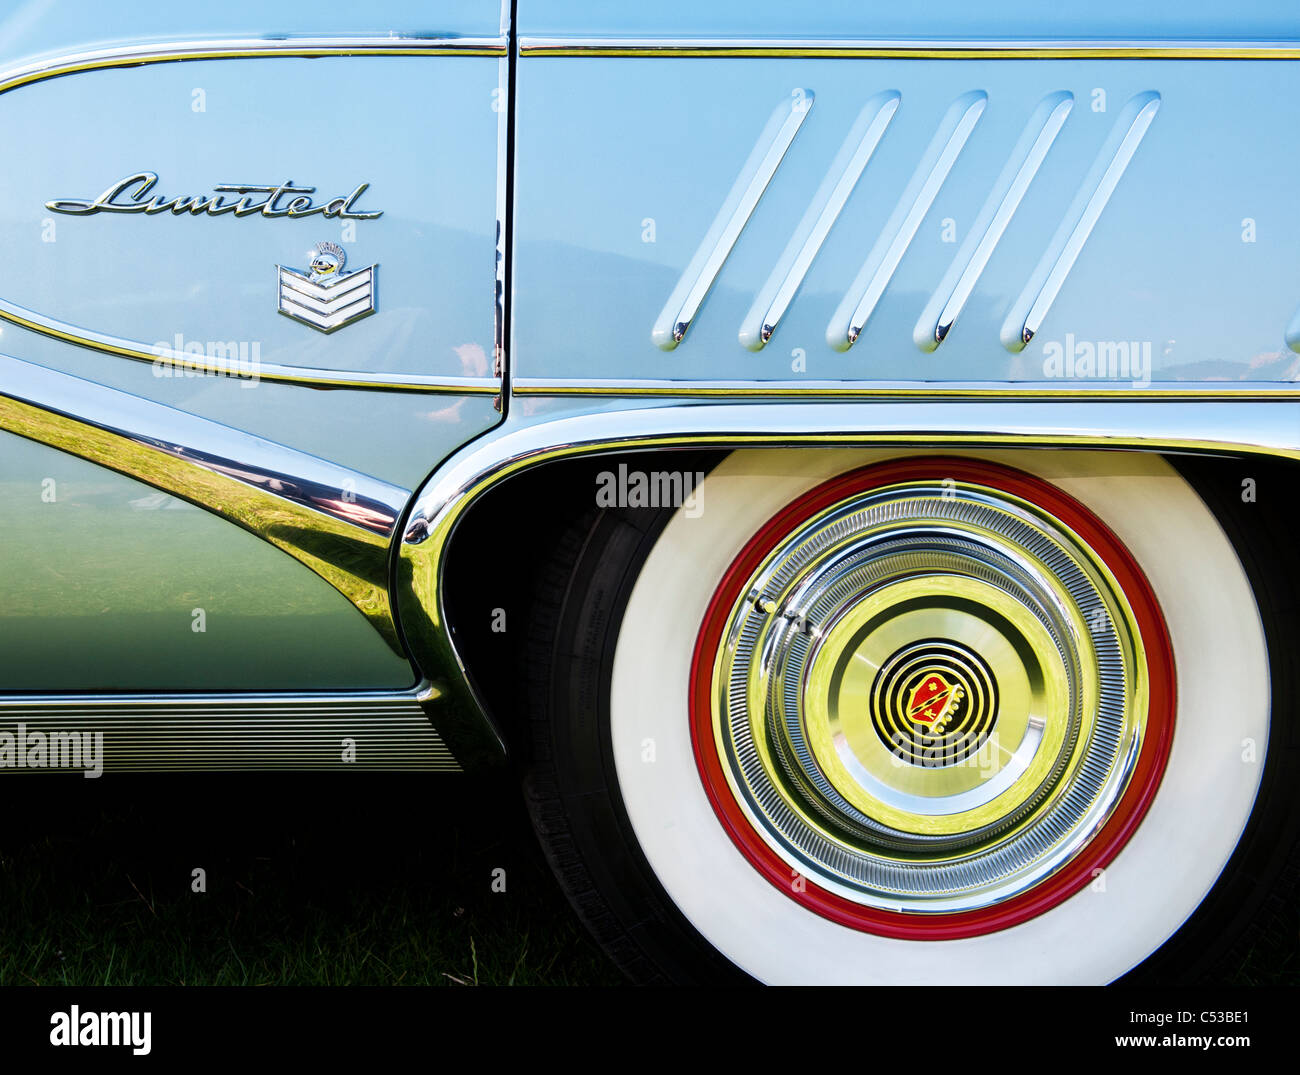 1958 Buick Limited. Classic American fifties car Stock Photo